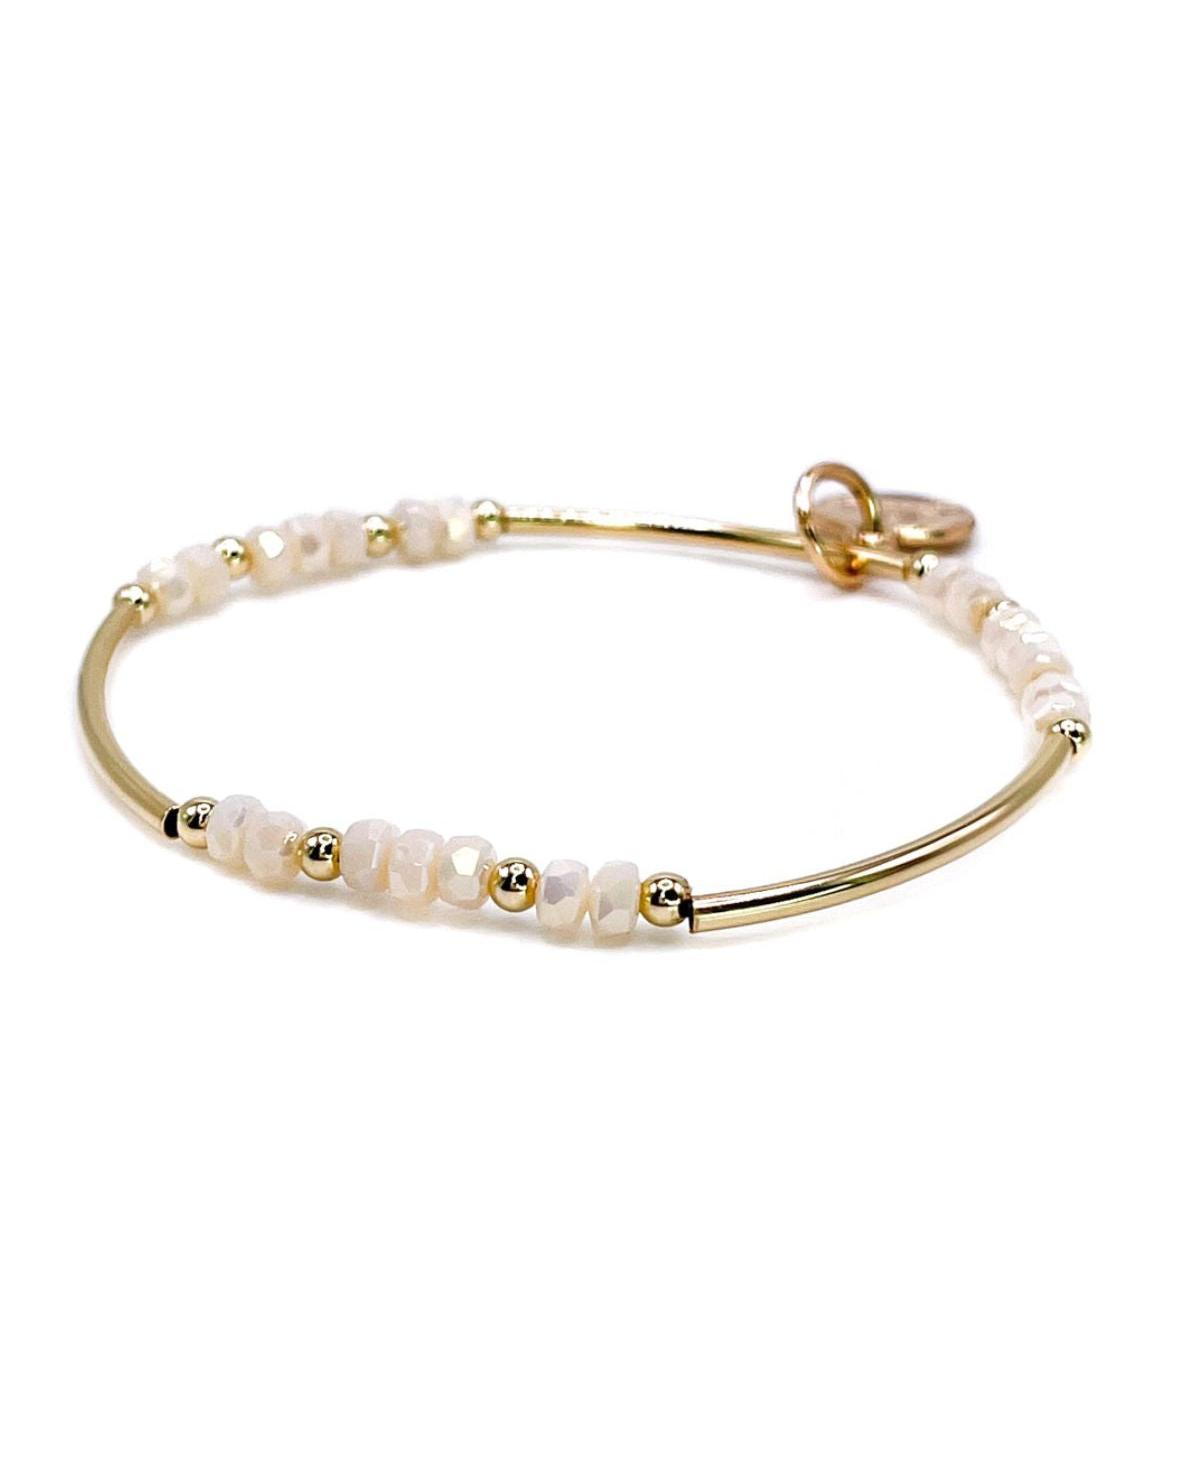 Non-Tarnishing Gold filled, 3mm Gold Ball and Gold Tube Stretch Bracelet - Gold